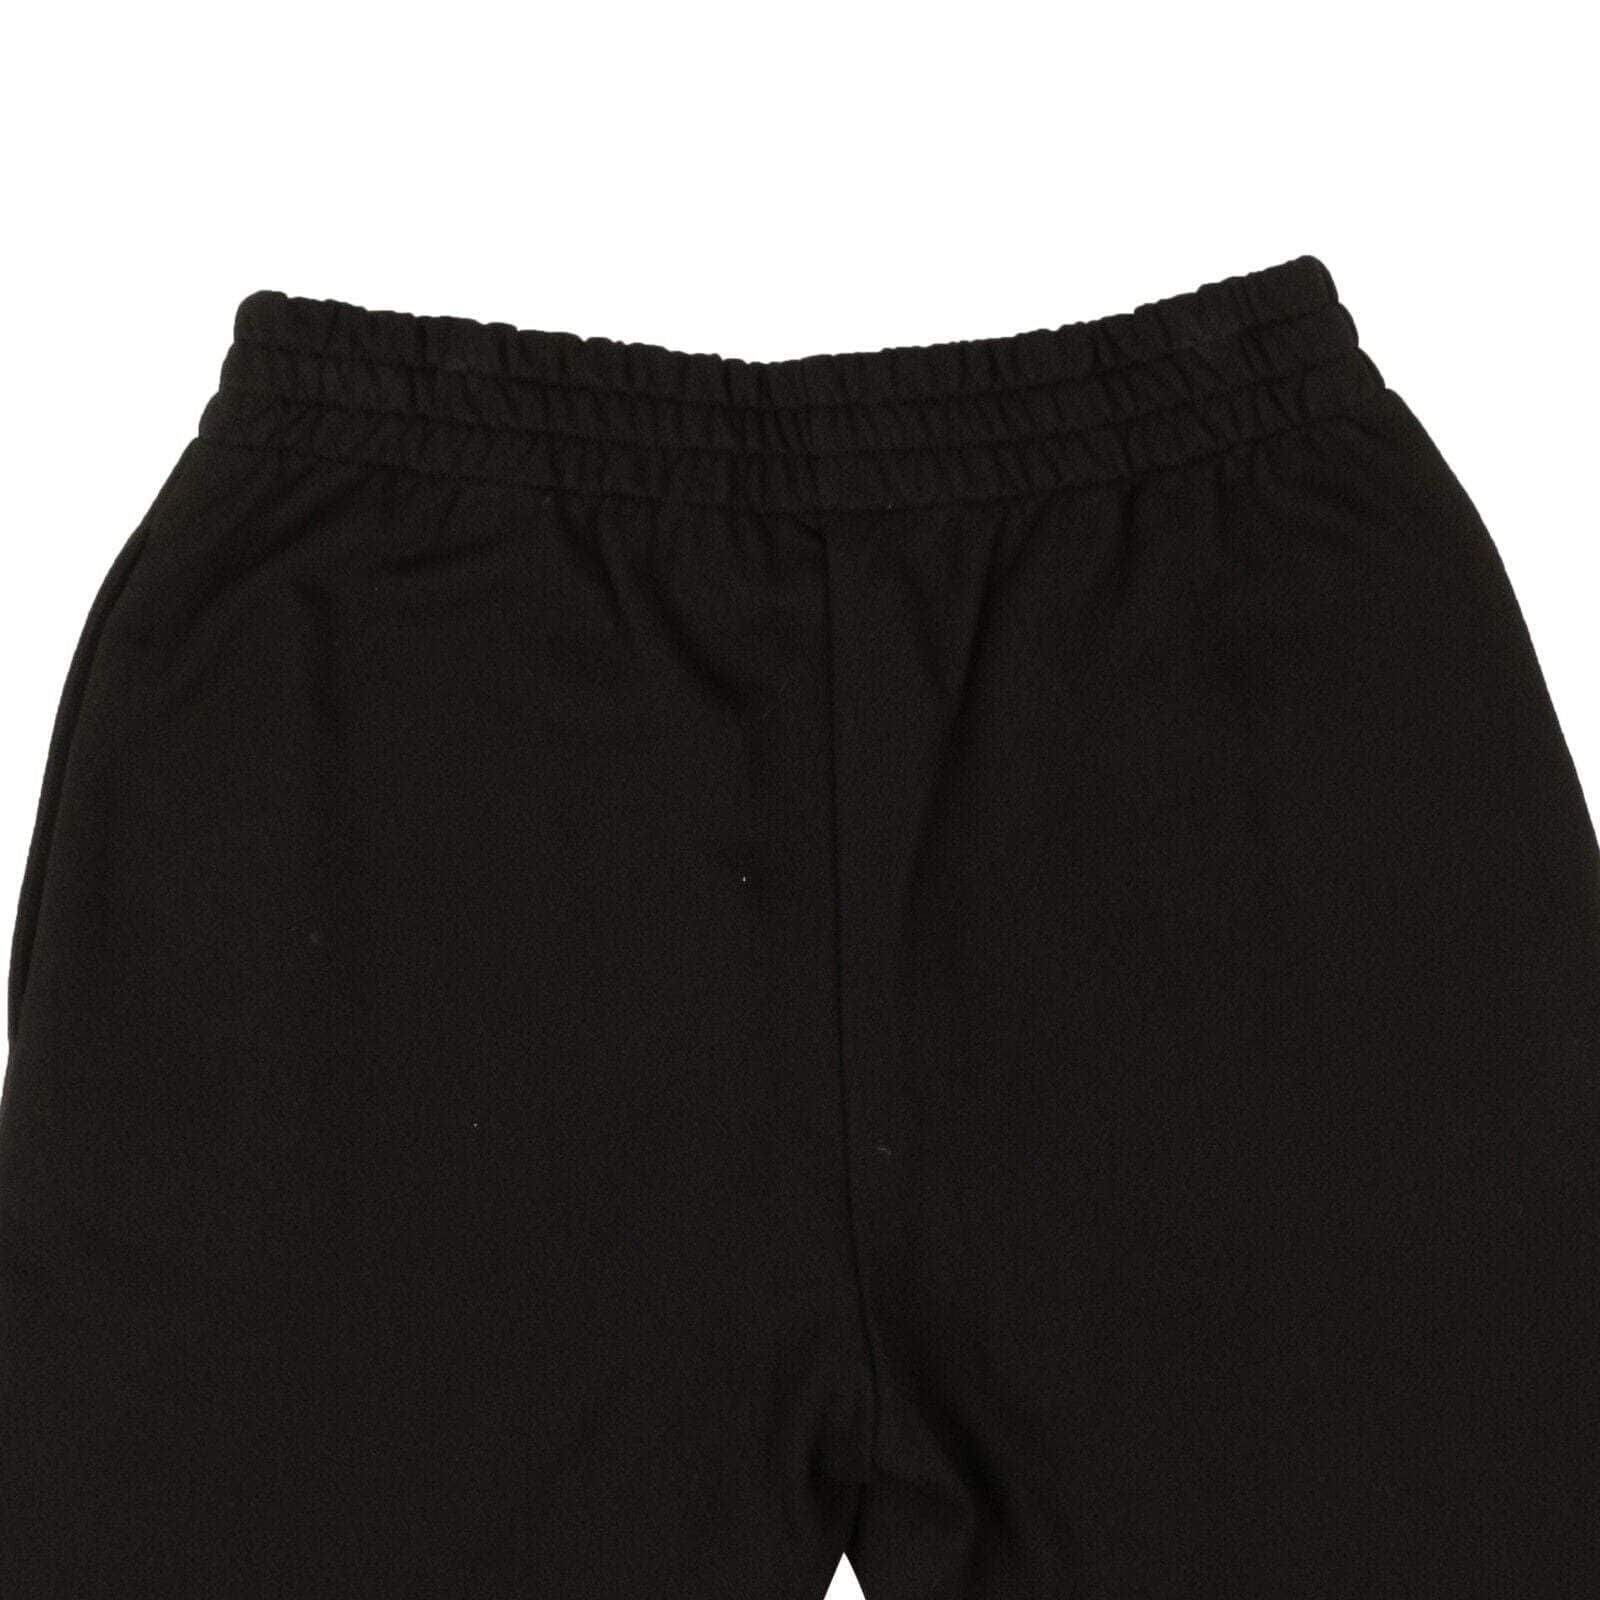 Blue Sky Inn blue-sky-inn, channelenable-all, chicmi, couponcollection, gender-mens, main-clothing, mens-shoes, size-l, size-m, size-s, size-xl, under-250 Black Embroidered Logo Sweat Shorts